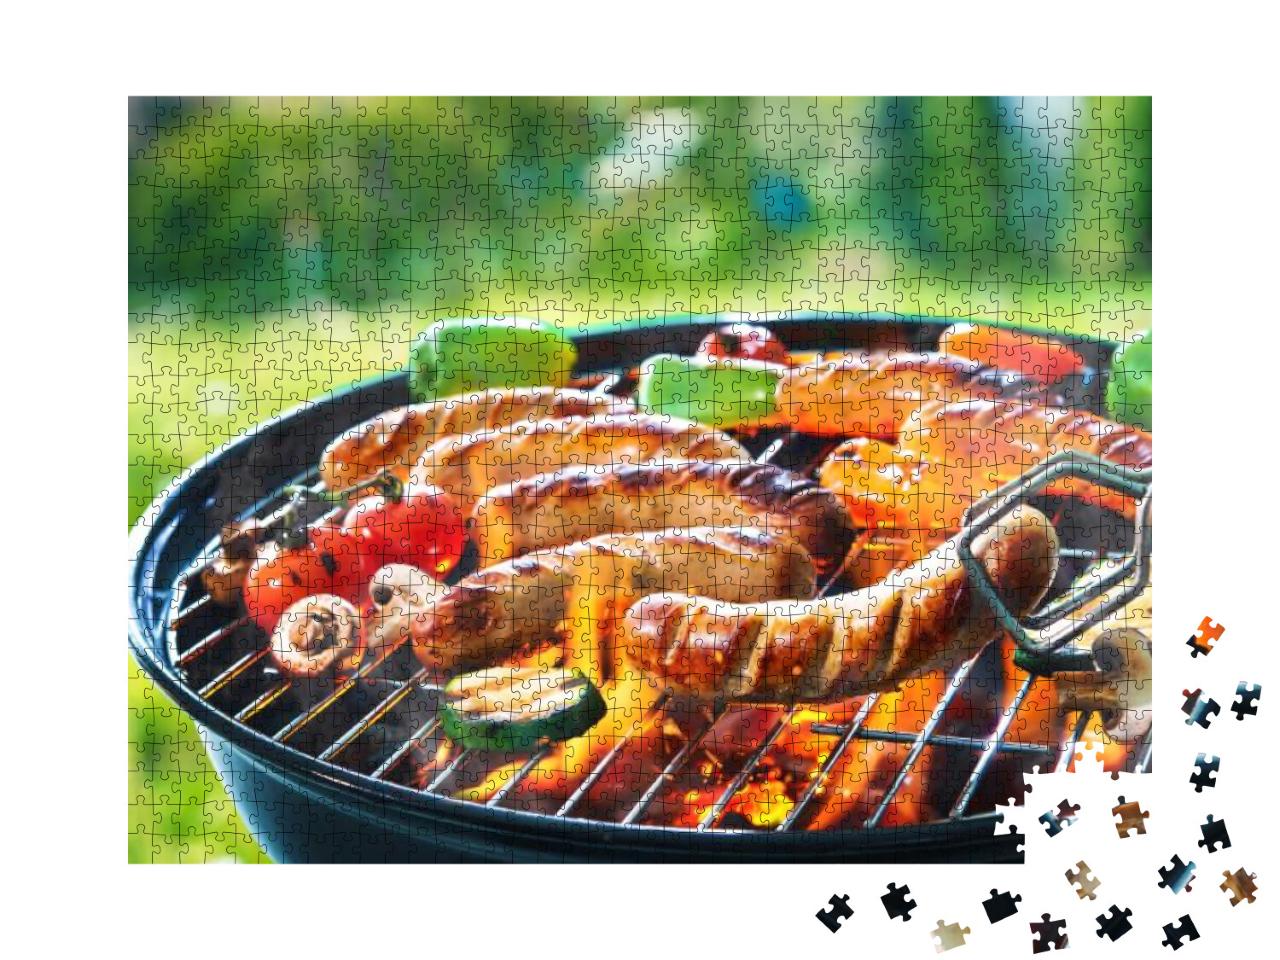 Grilled sausage on the picnic flaming grill Jigsaw Puzzle with 1000 pieces